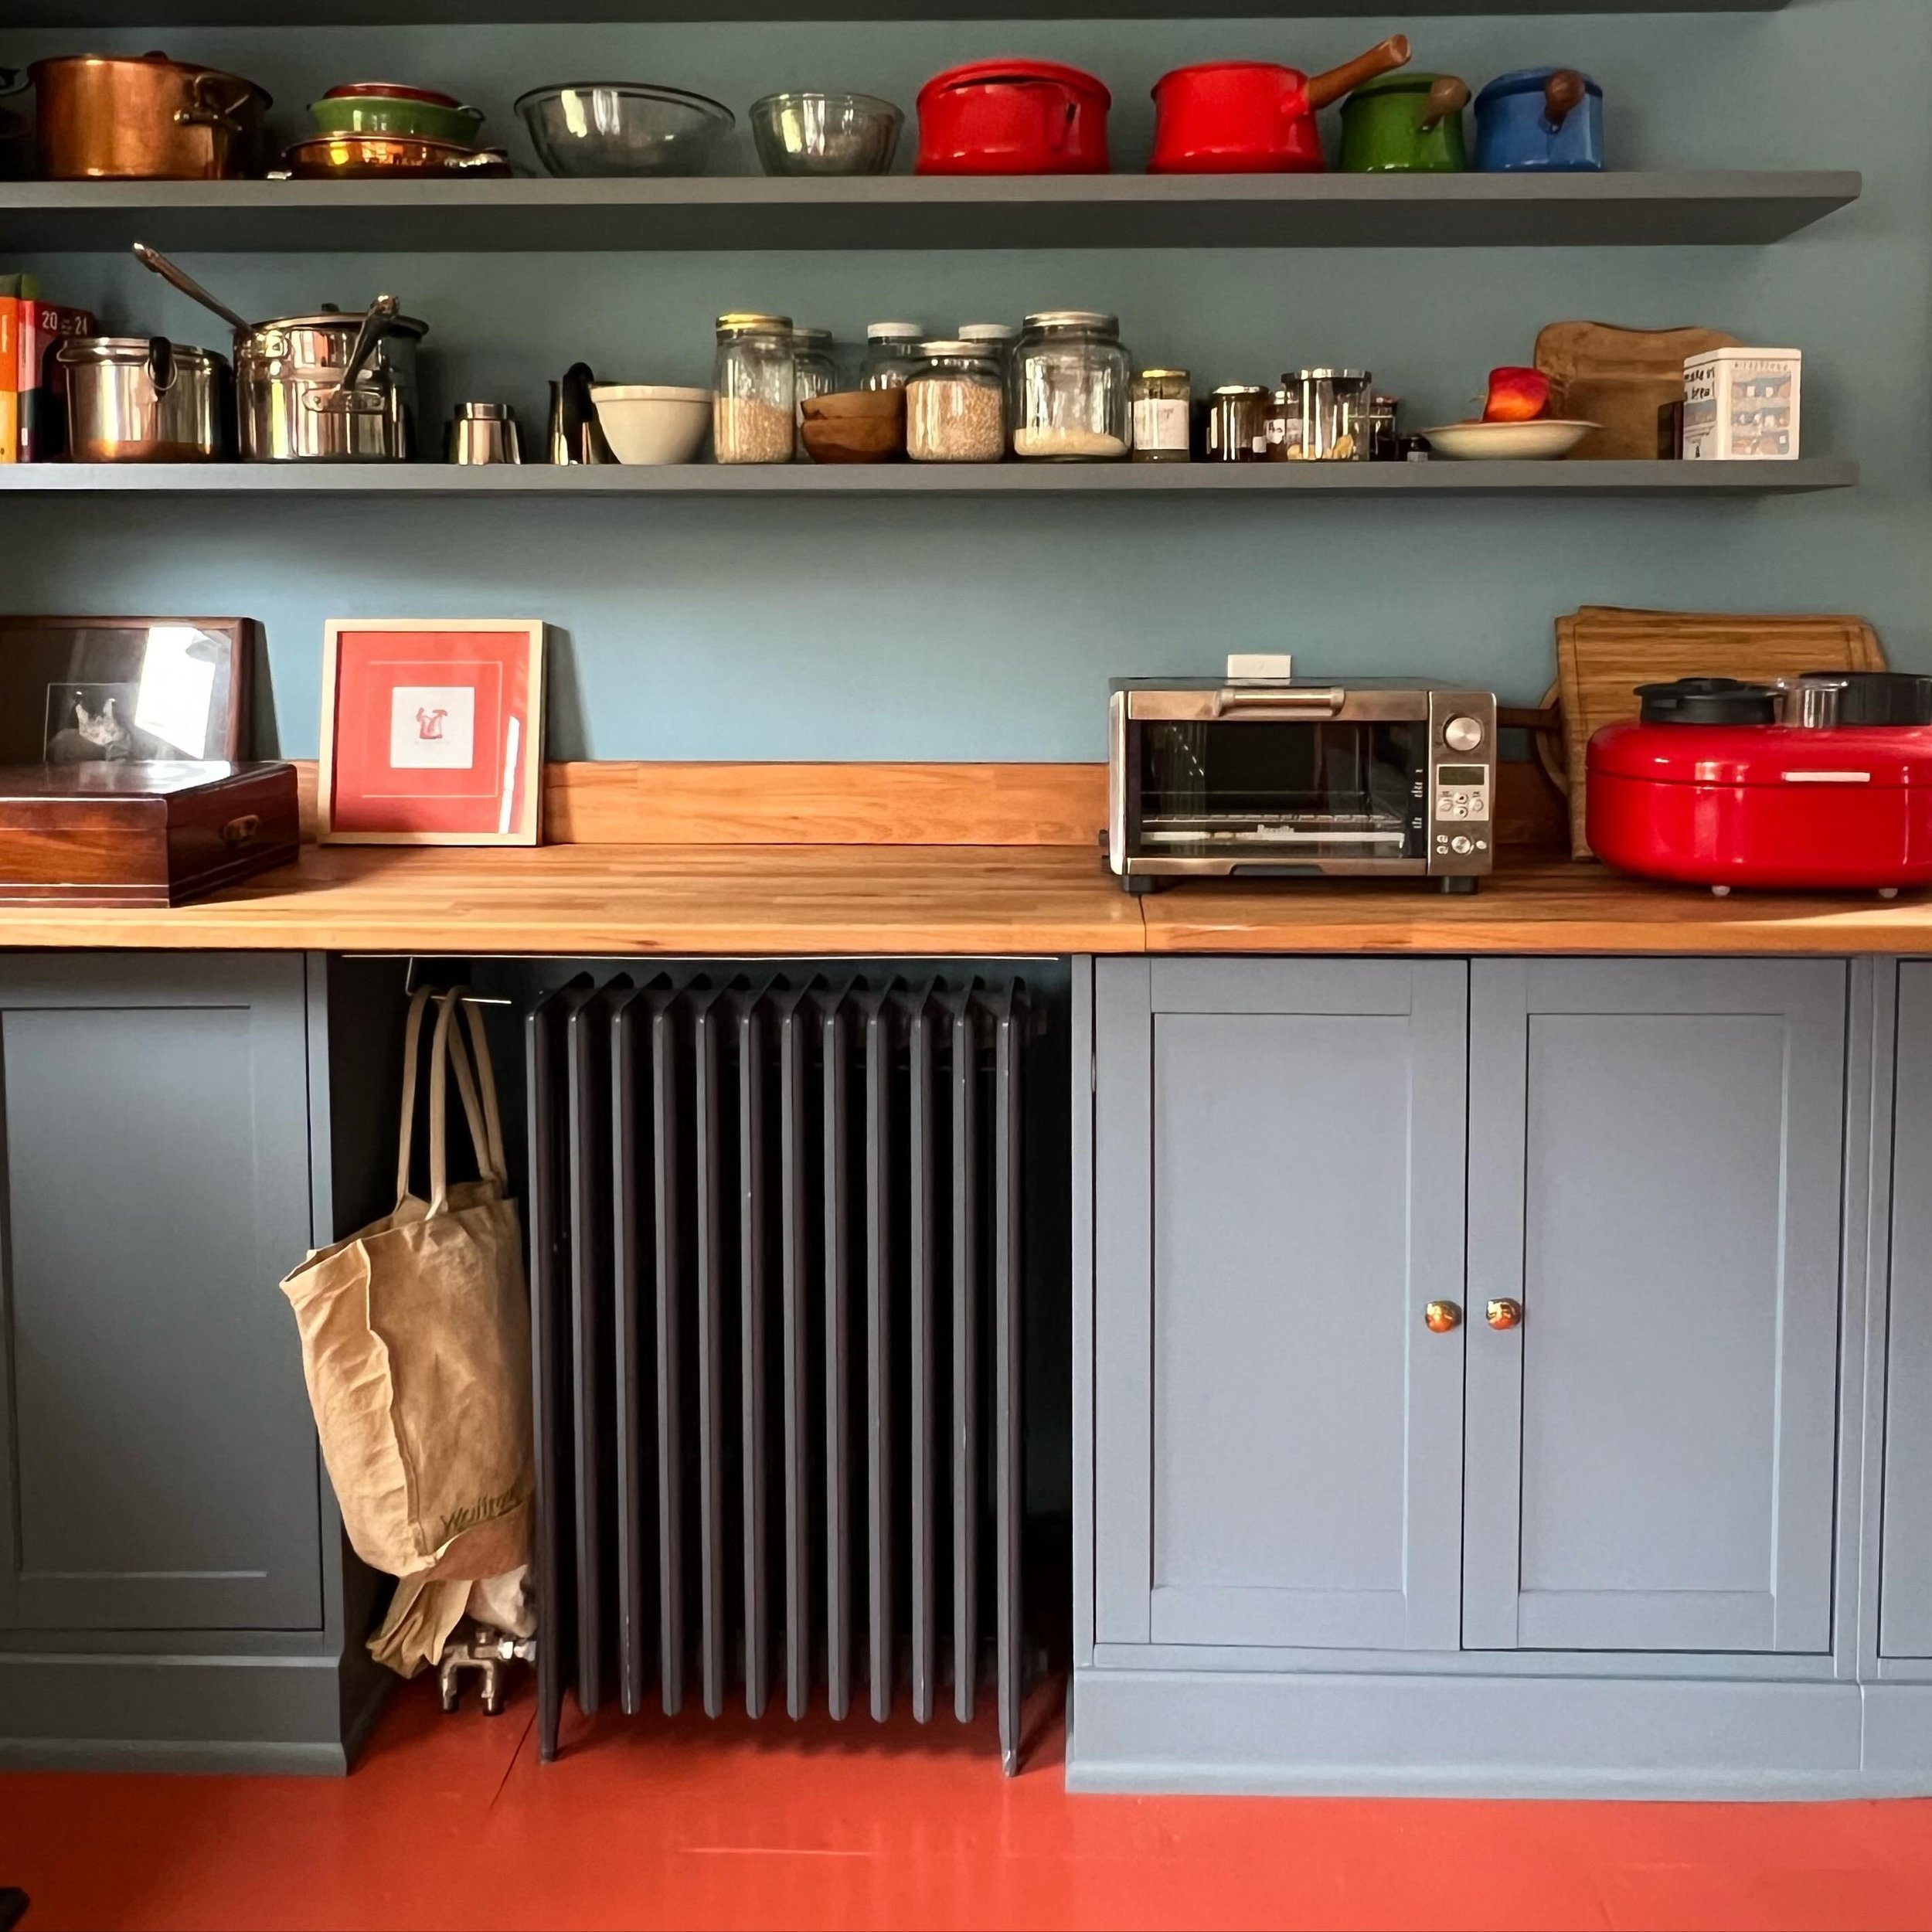 Next to my favorite reading room, my favorite kitchen! Fidelma and James have a way with color and decor that is one of my biggest inspirations.  #colorfulhome #colorlove #colorfulkitchen #friendswithgreattaste